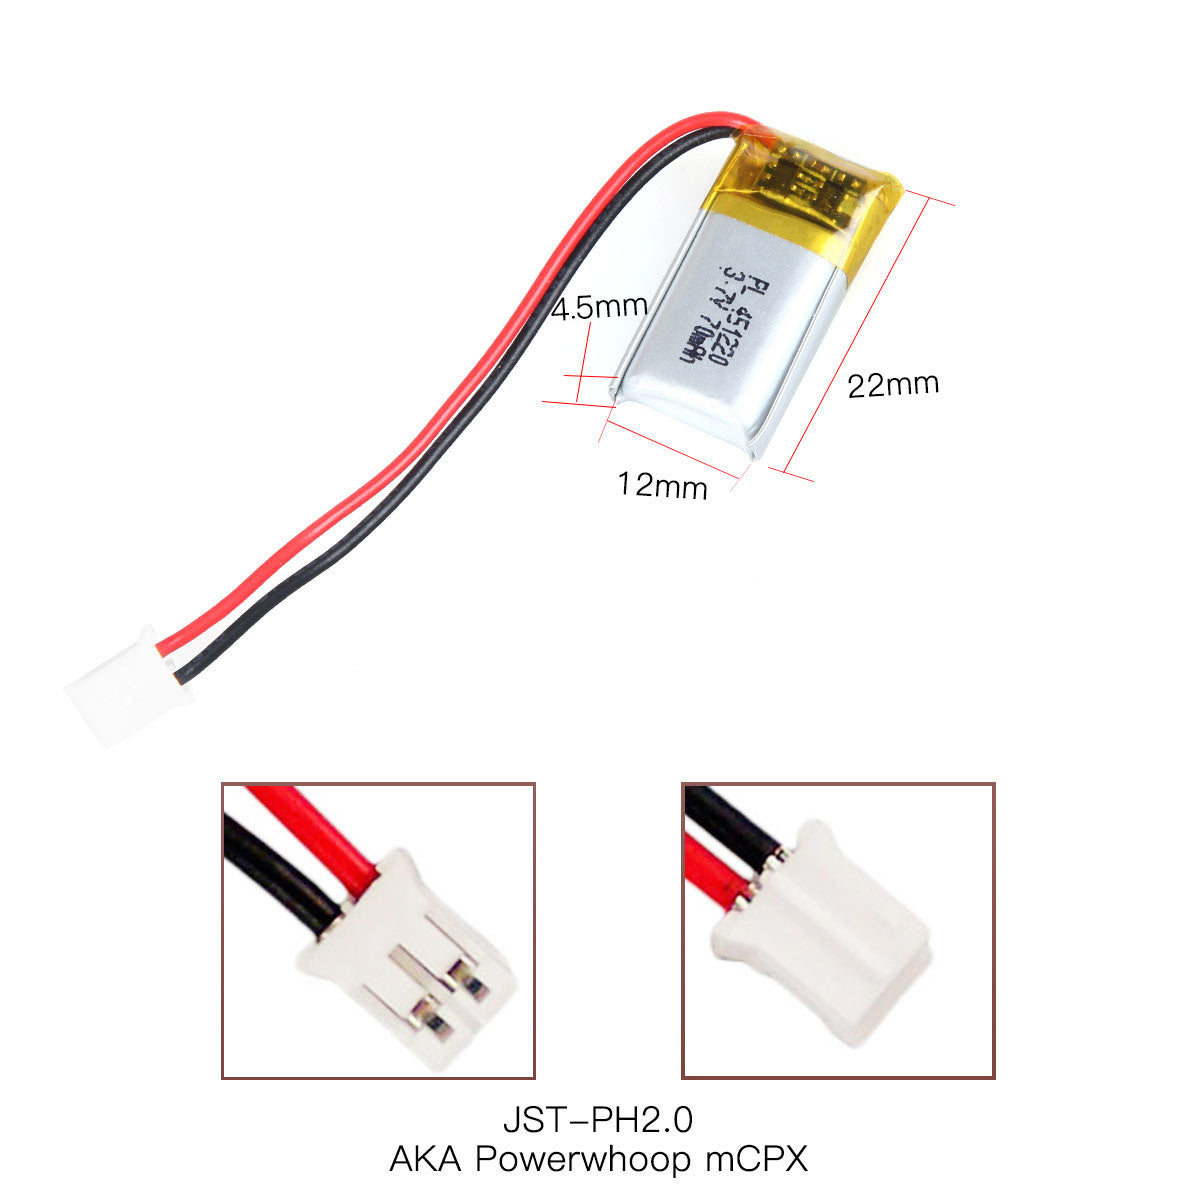 YDL 3.7V 70mAh 451220 Rechargeable Polymer Lithium-Ion Battery